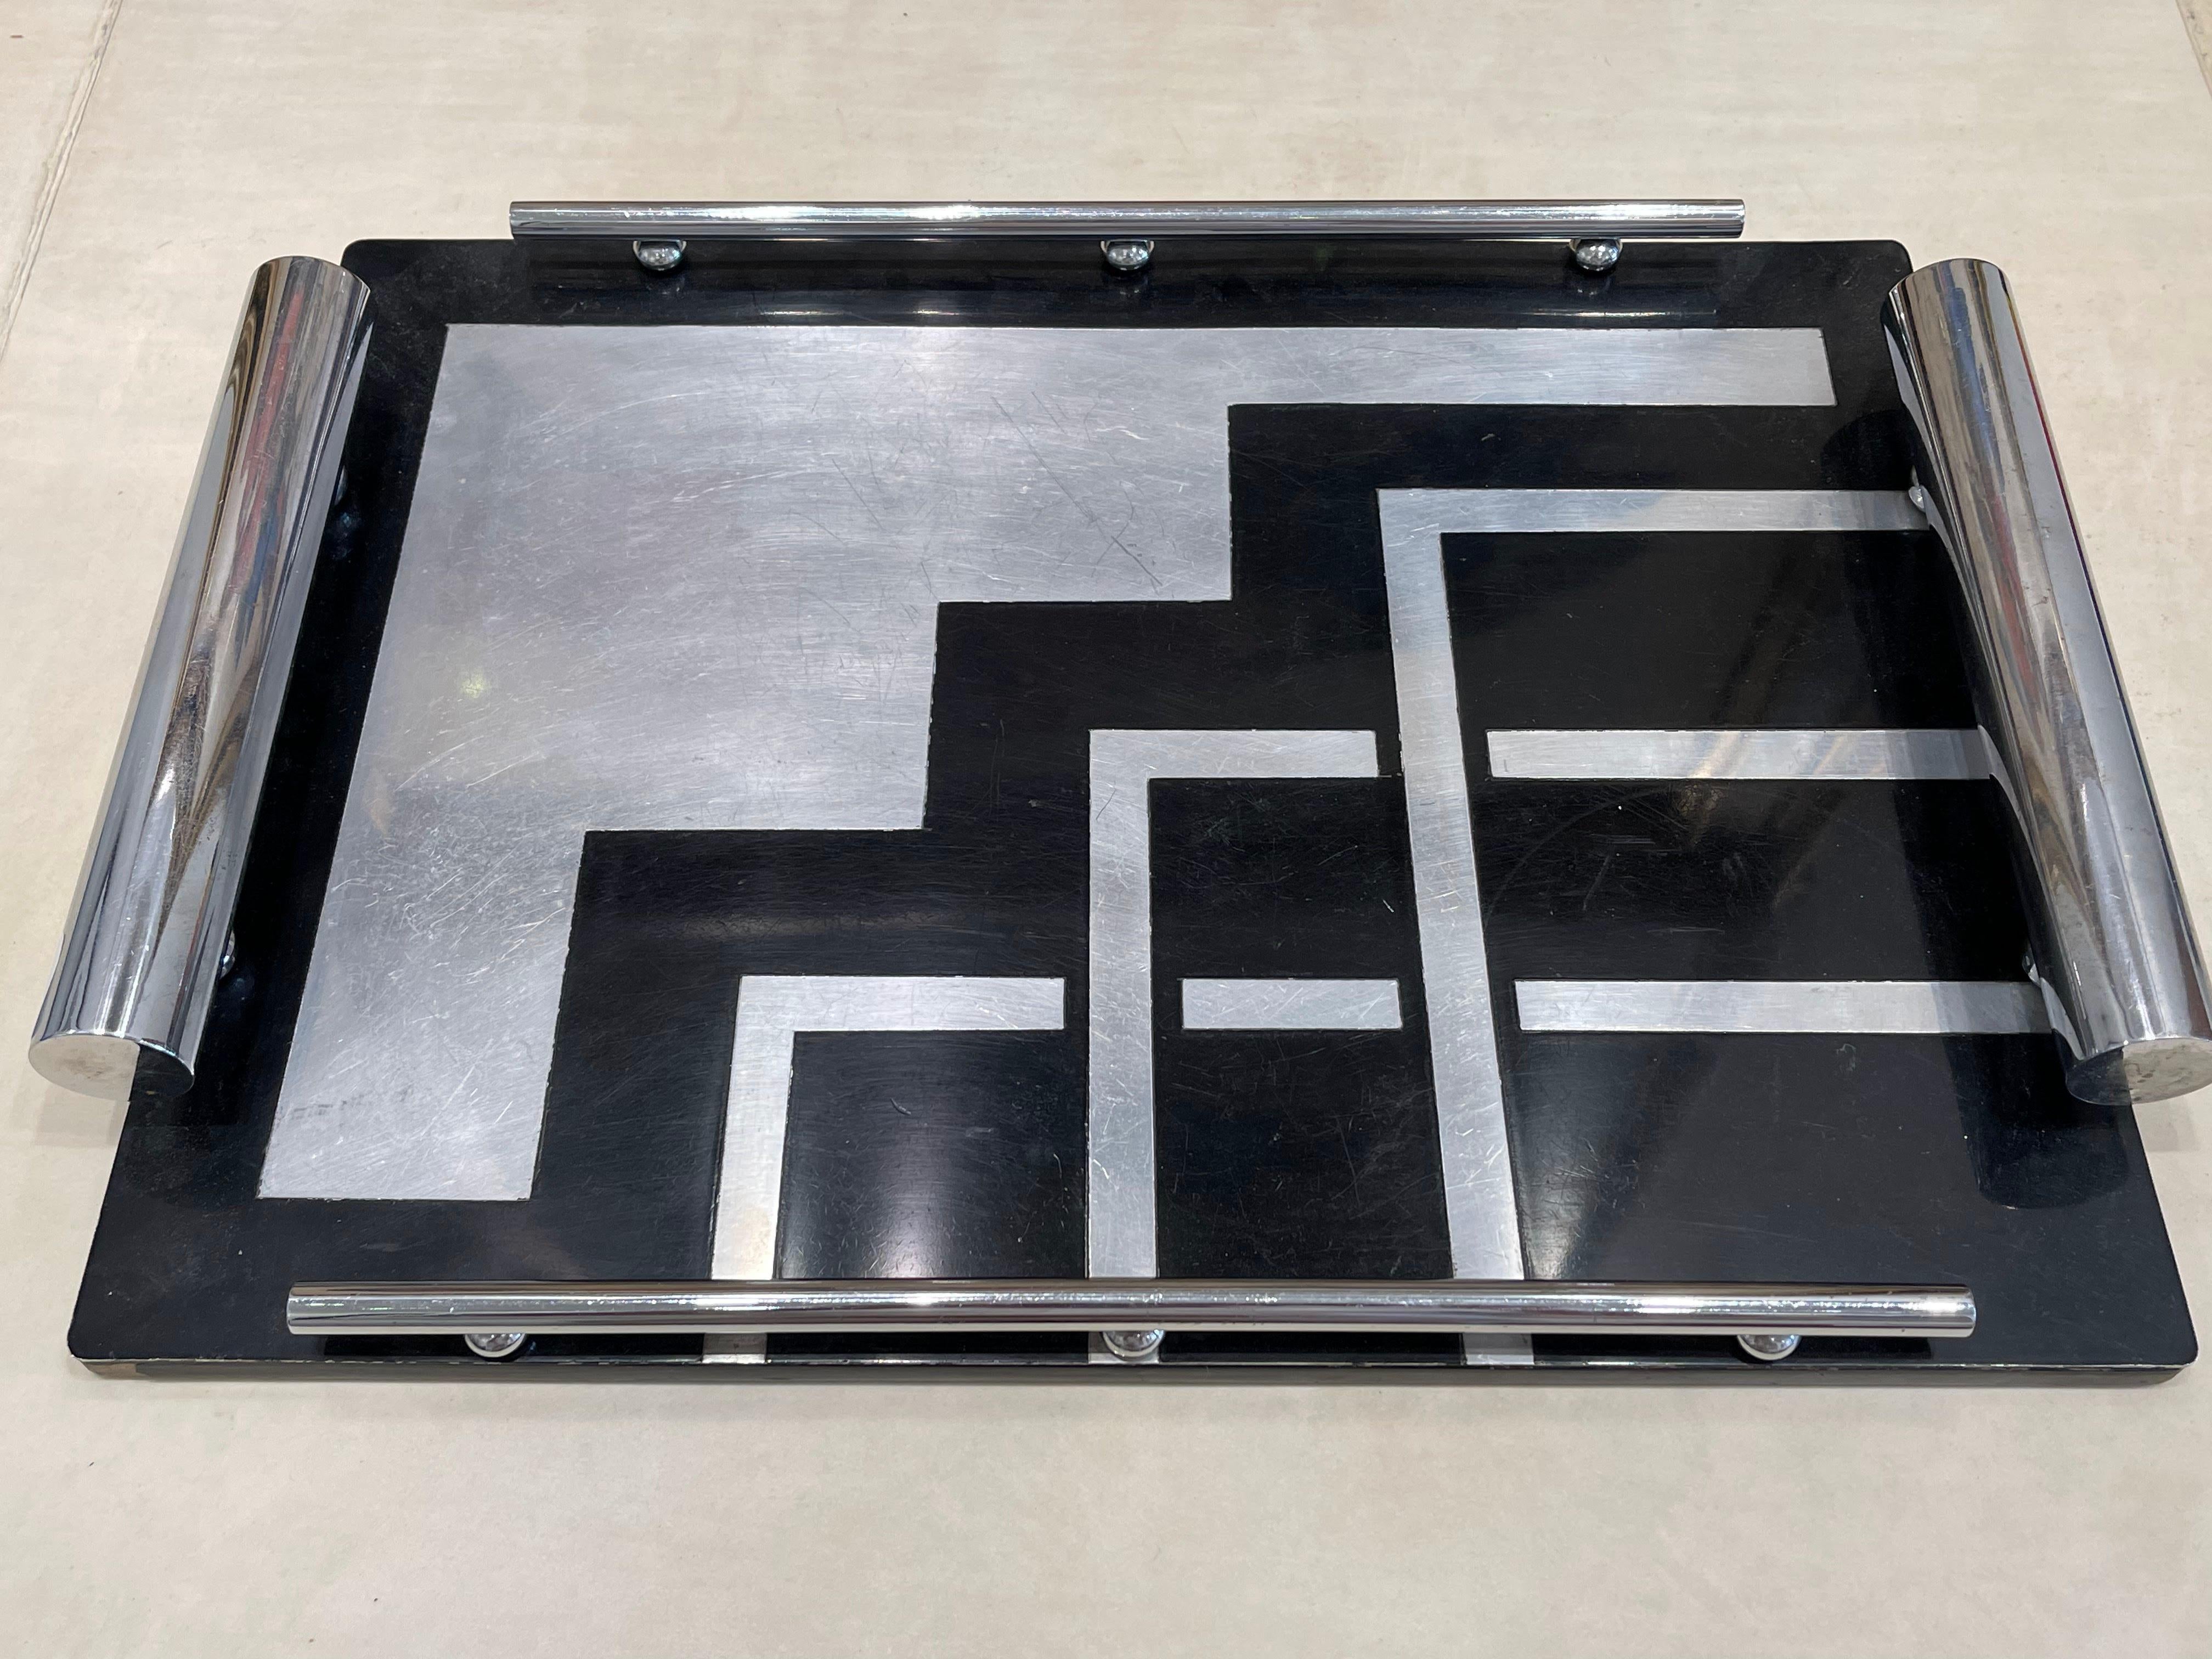 This rectangular tray adorned with geometric patterns in typical  Bauhaus style. The pattern is asymmetrical with regular motifs, the lines are clean and simples. This tray dates back to the 1930s.

The tray is made of black lacquered  wood, inlaid